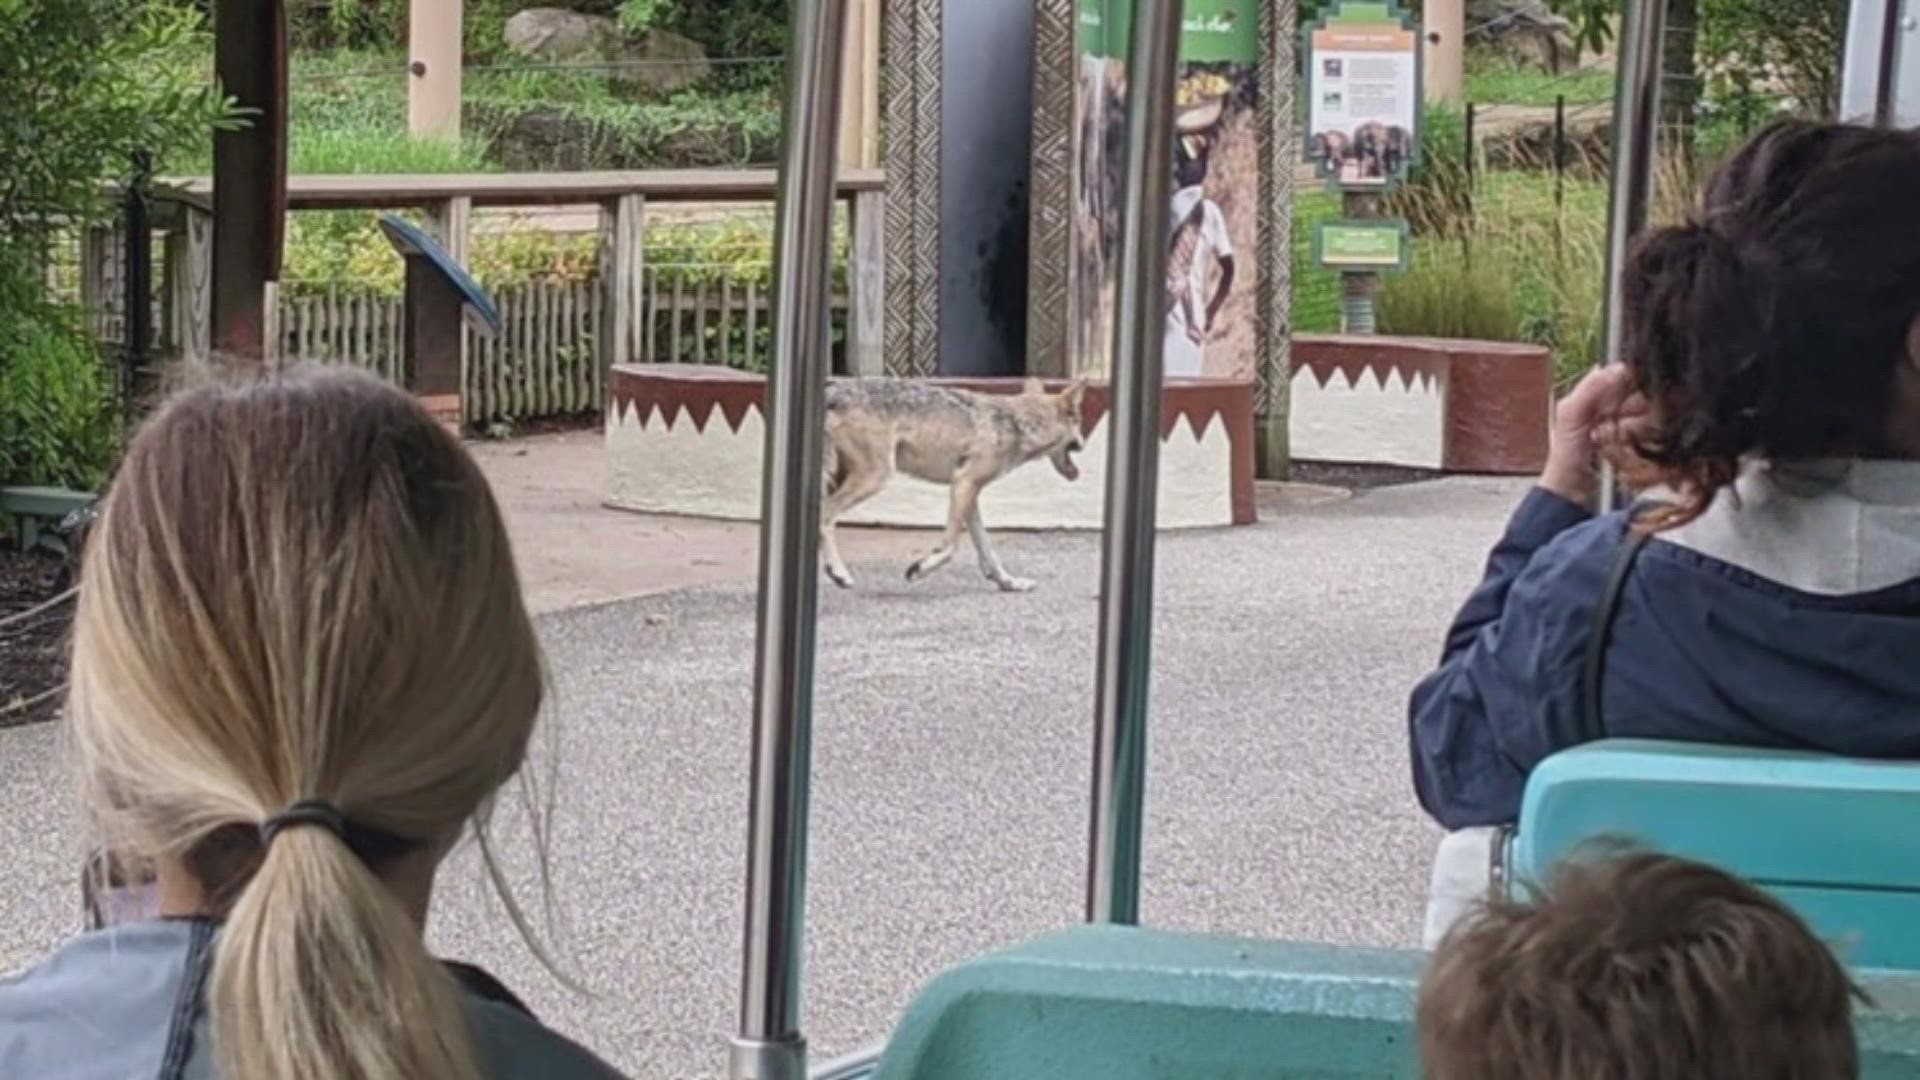 The Cleveland Metroparks Zoo was on lockdown Monday as staff worked to secure a wolf that escaped its habitat.